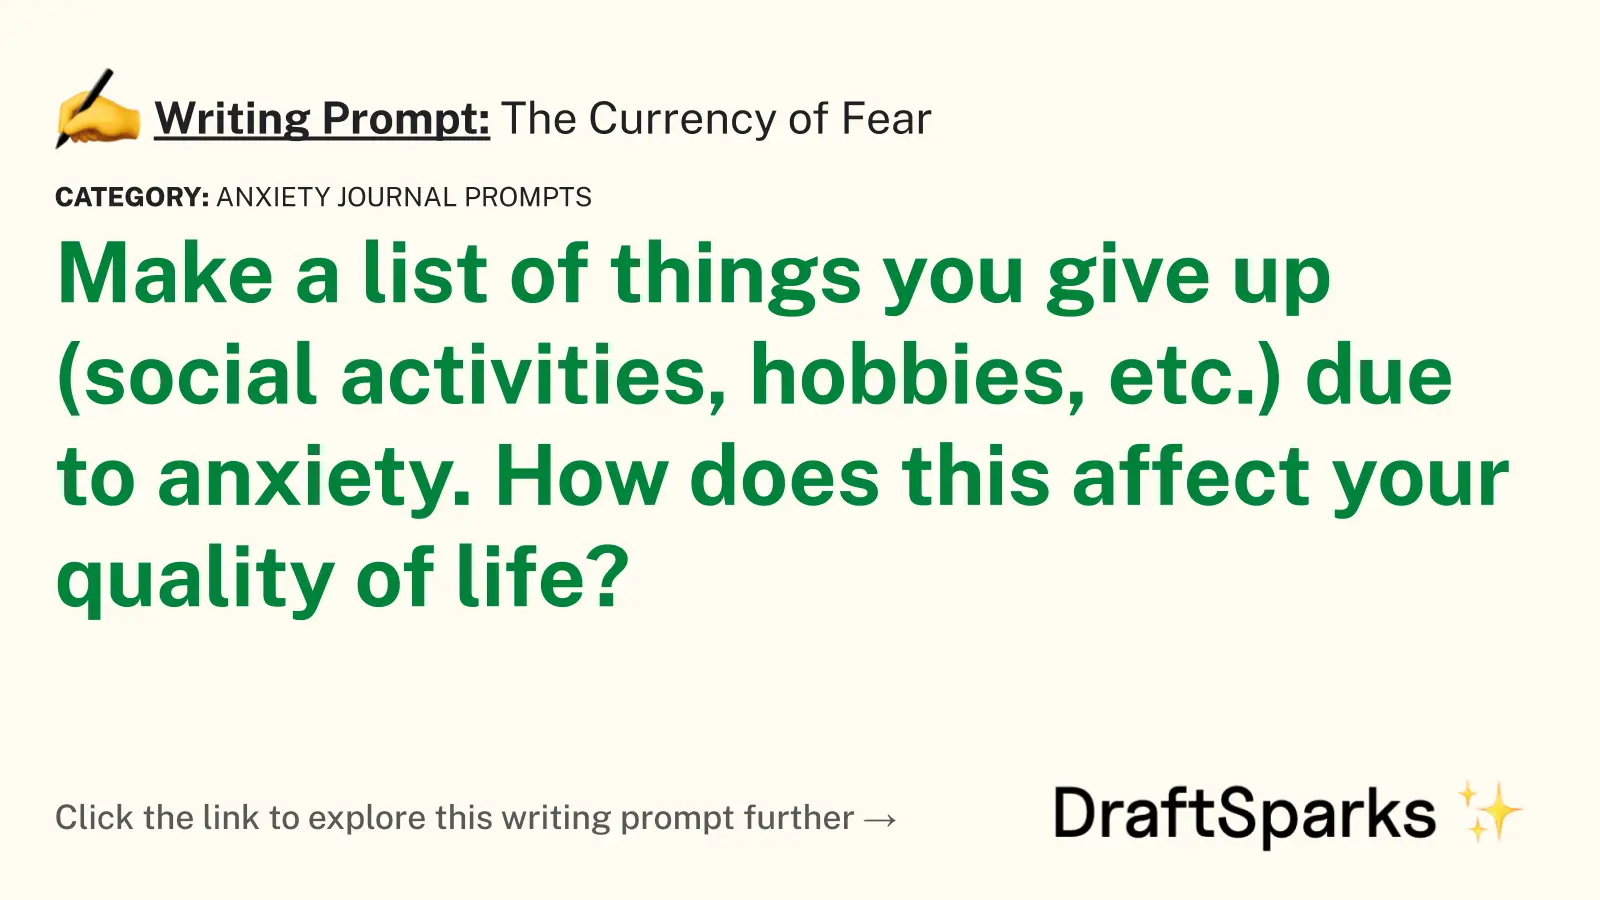 The Currency of Fear